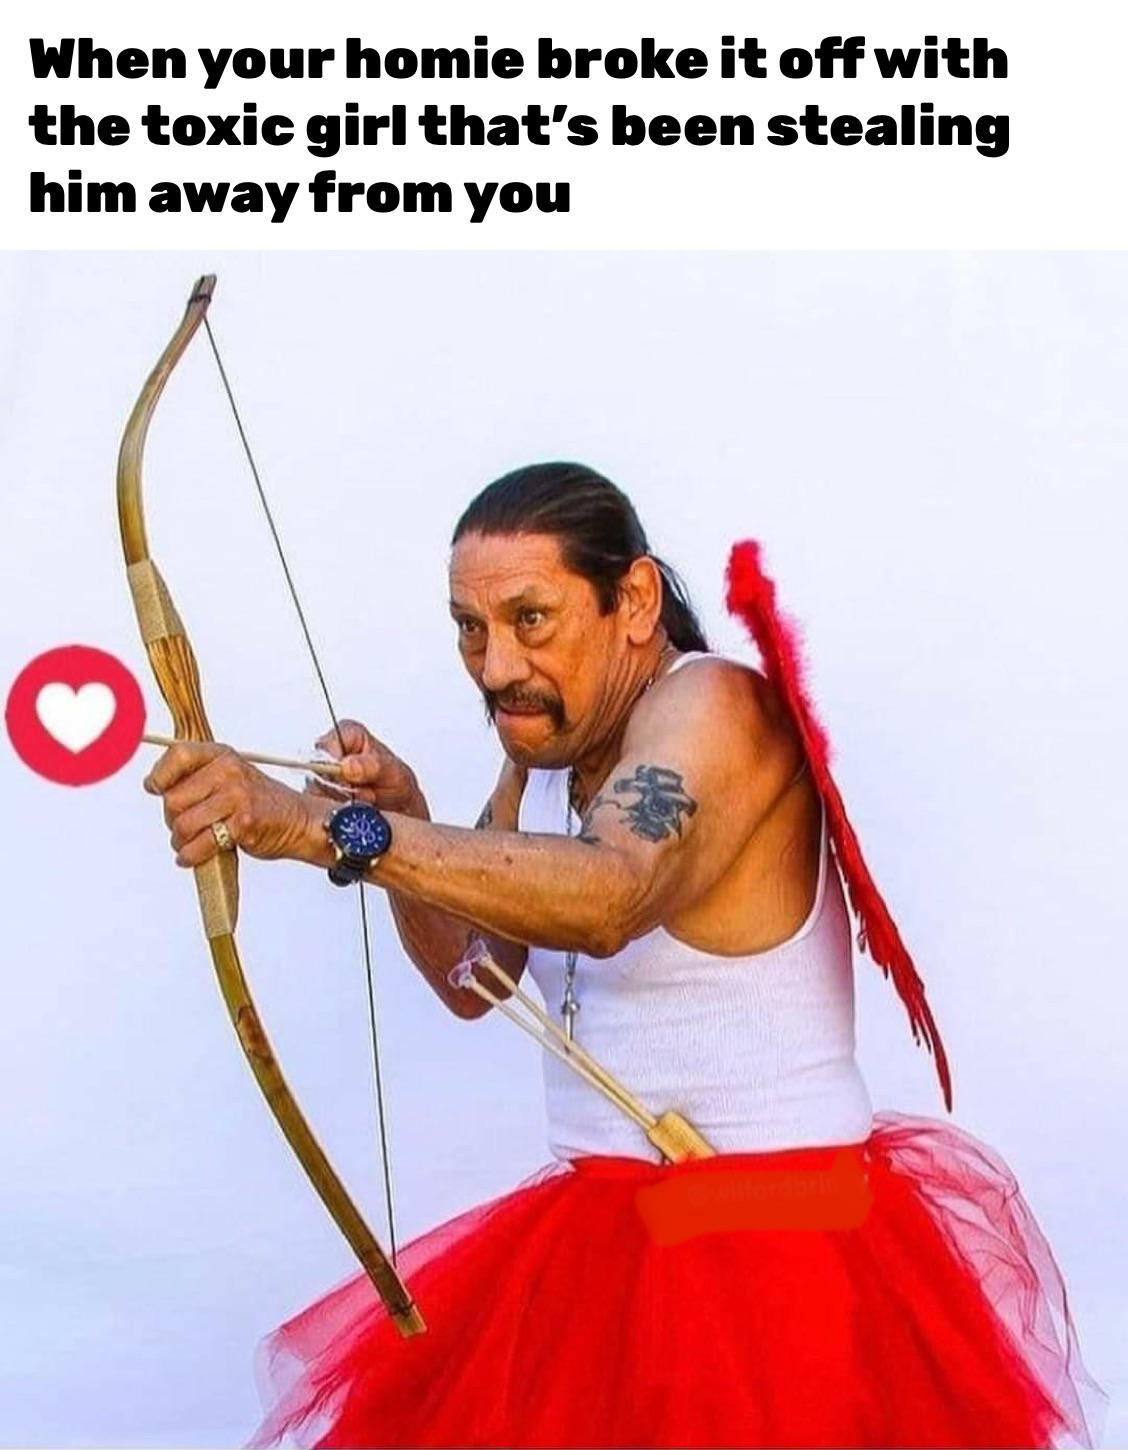 funny memes - dank memes - danny trejo cupid - When your homie broke it off with the toxic girl that's been stealing him away from you